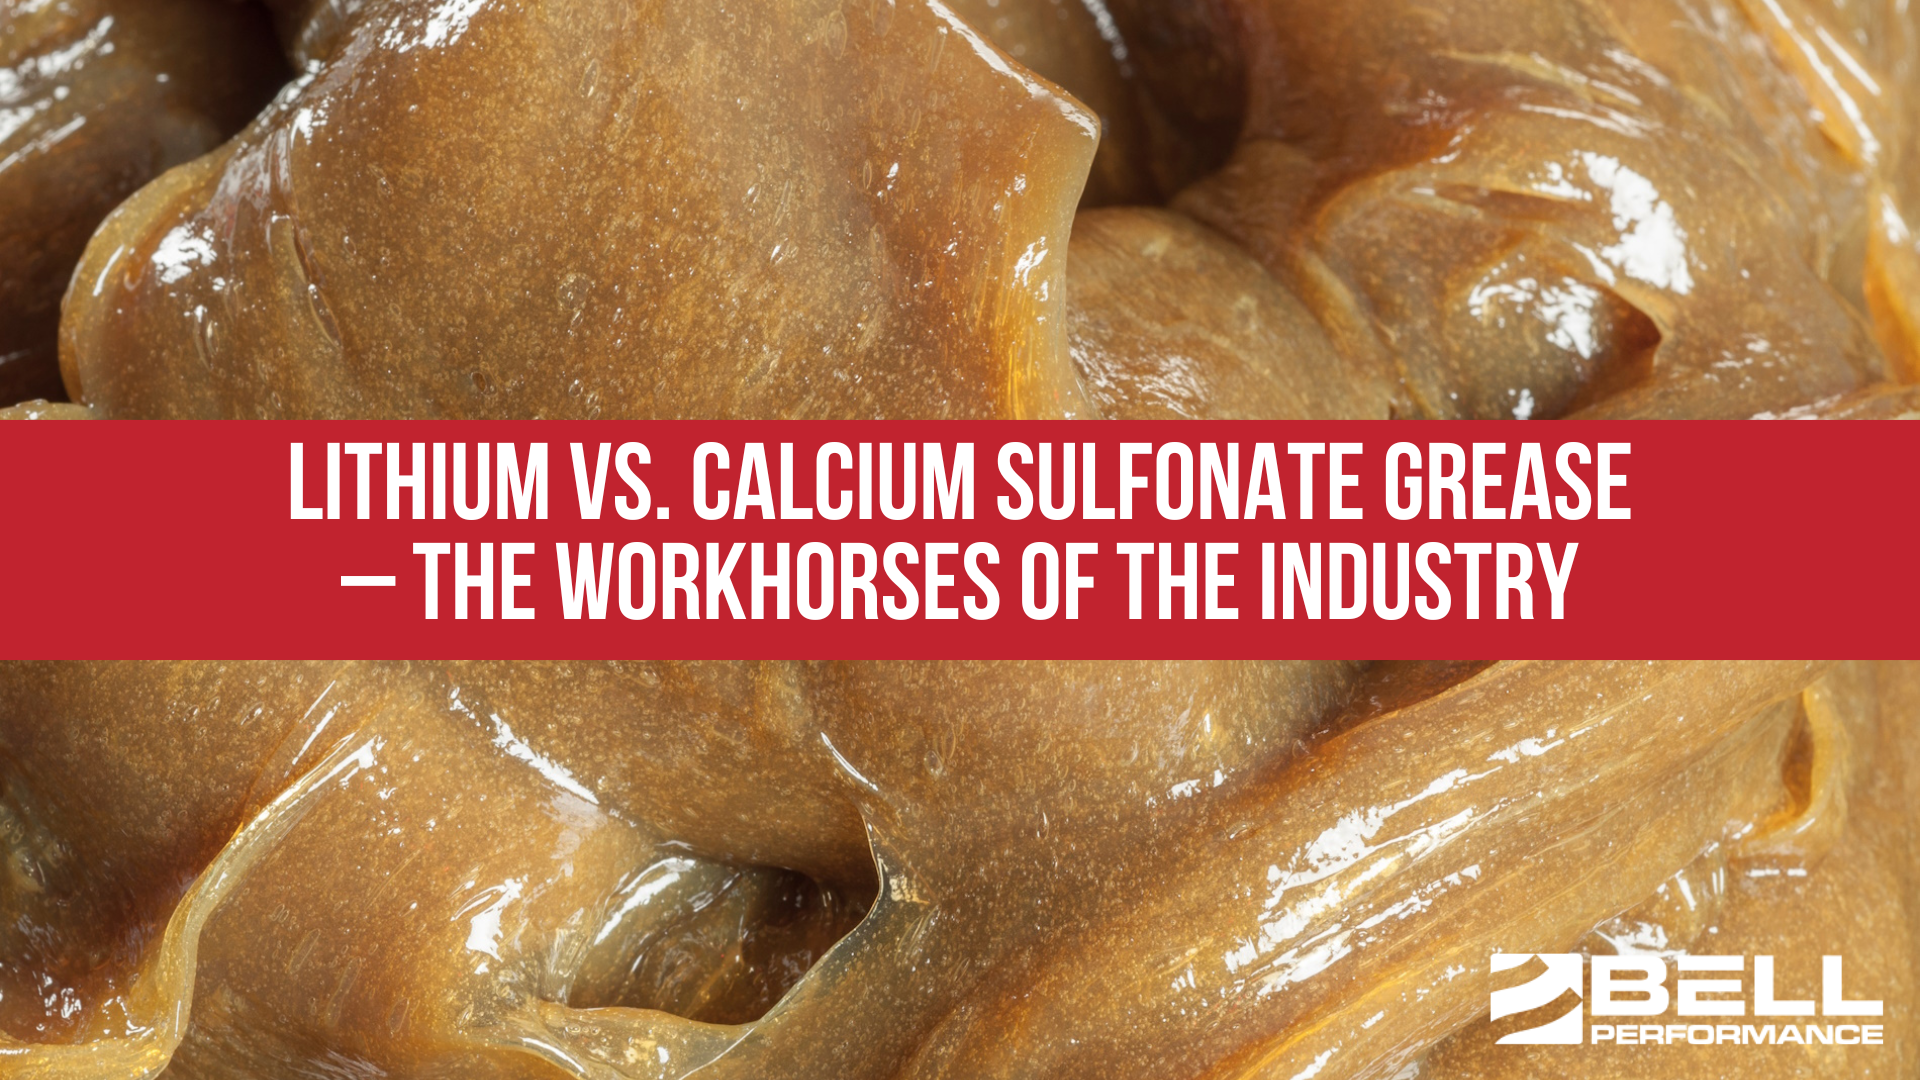 Lithium vs. Calcium Sulfonate Grease – The Workhorses of the Industry